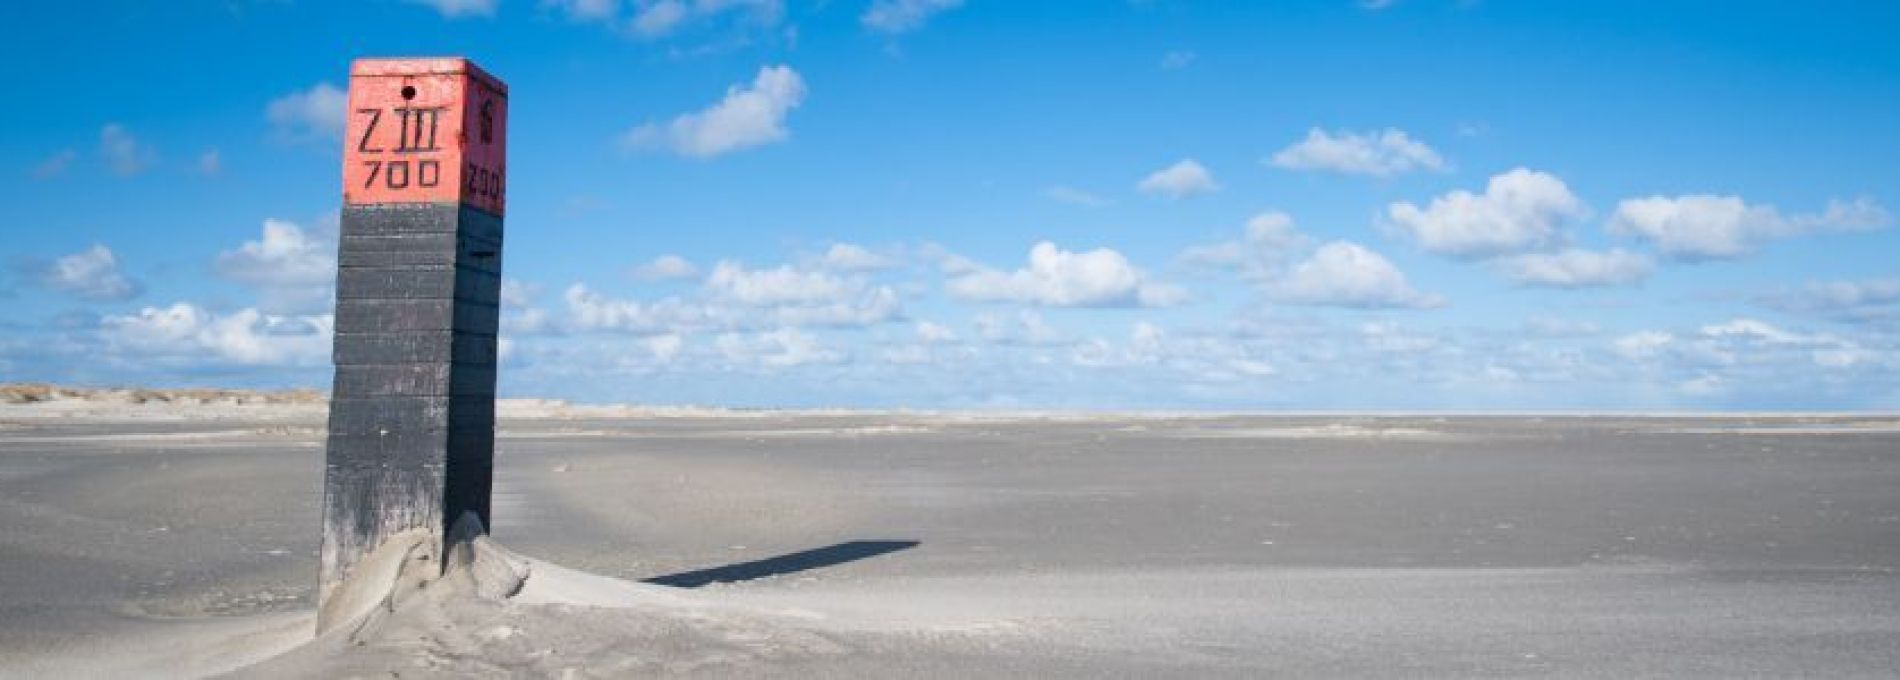 Frequently asked questions about activities and events on Ameland - Tourist Information Centre VVV Ameland.